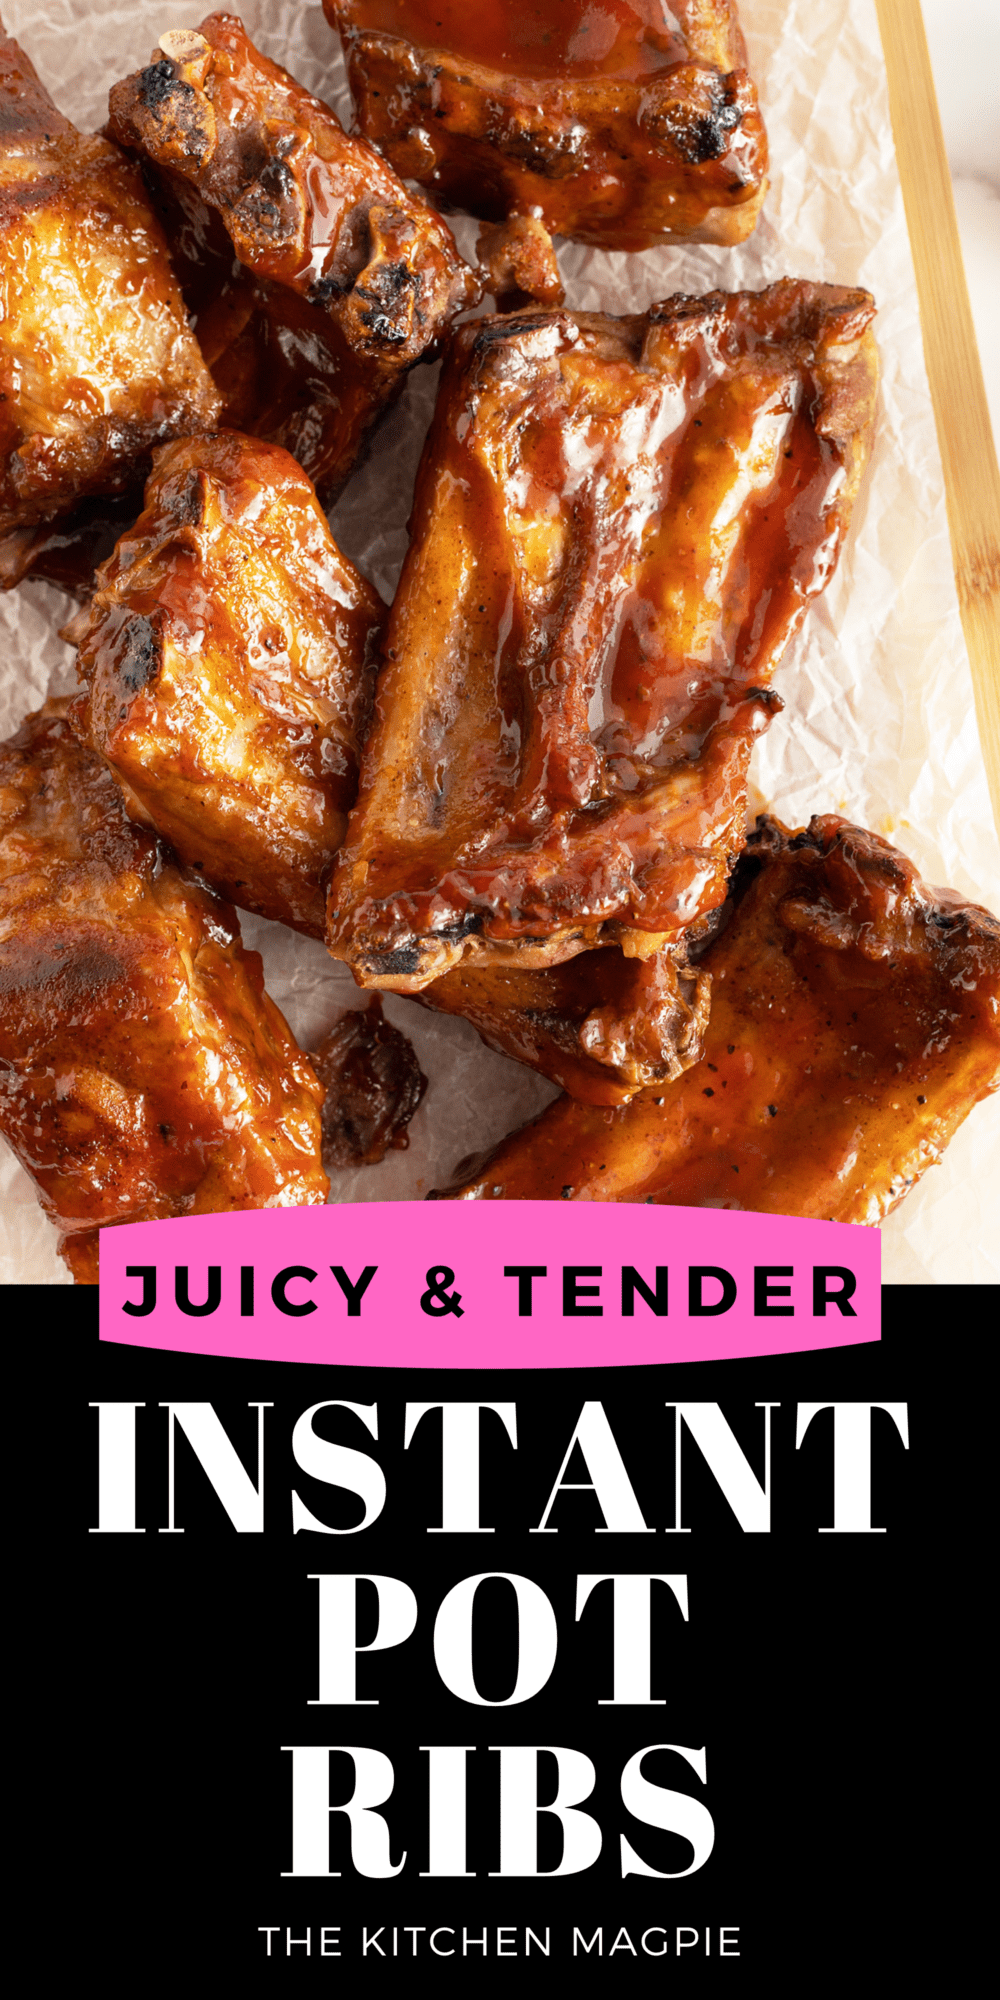 With the use of an Instant Pot, it is easier than ever to make supple, tender ribs all on your own!